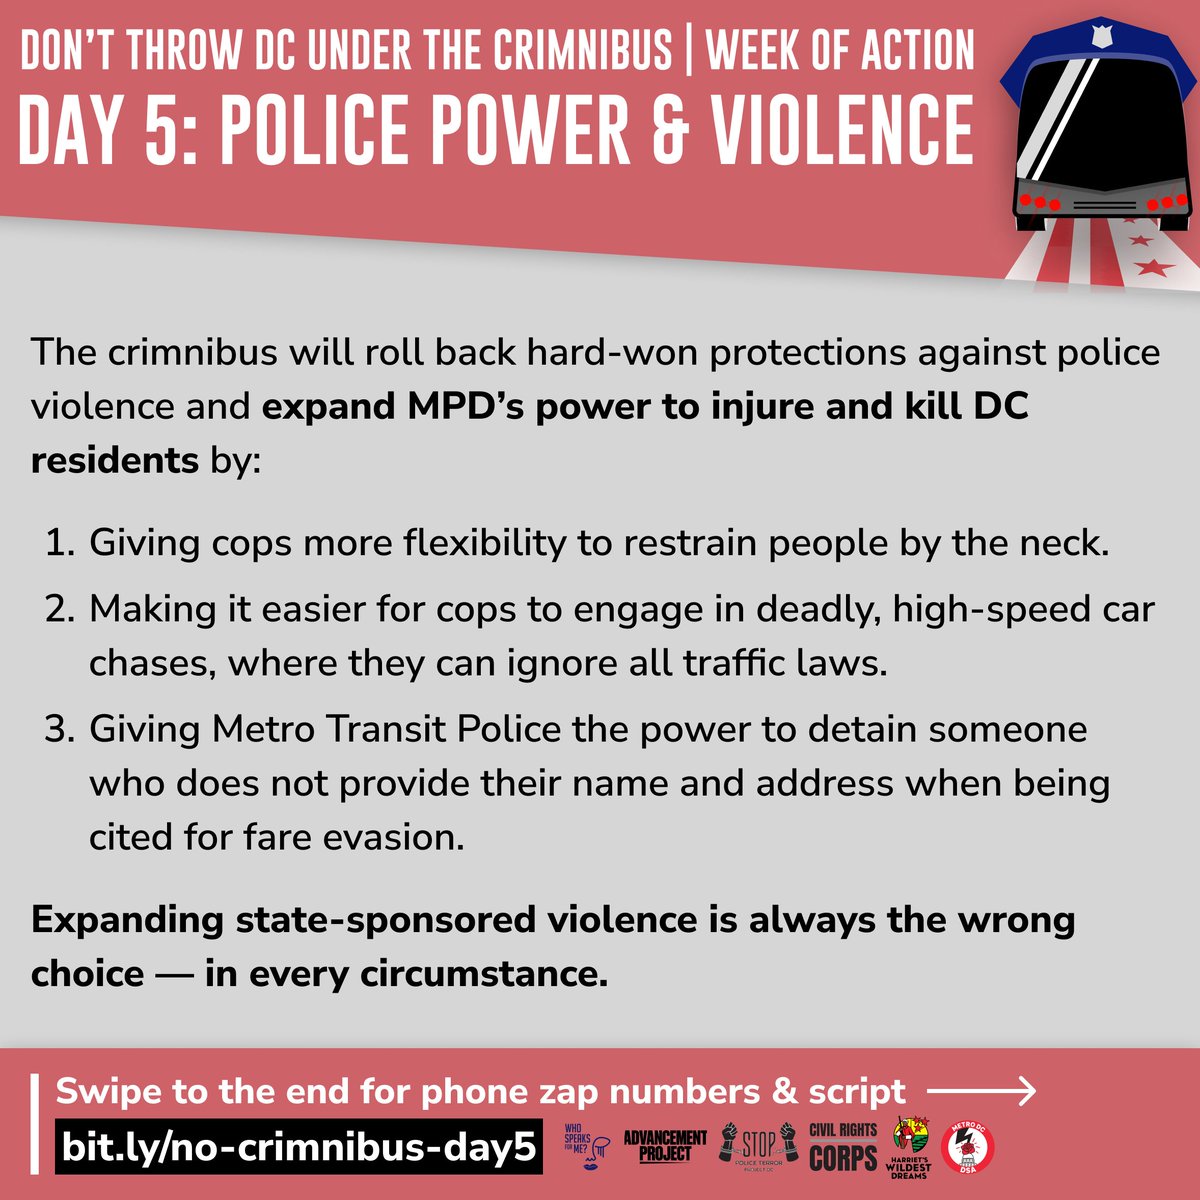 It's the LAST day of the No Crimnibus Week of Action, let's go out with a bang! Flood @councilofdc's phones & inboxes to tell them NOT to roll back protections against police violence or expand MPD’s power to harm DC residents → bit.ly/no-crimnibus-d…